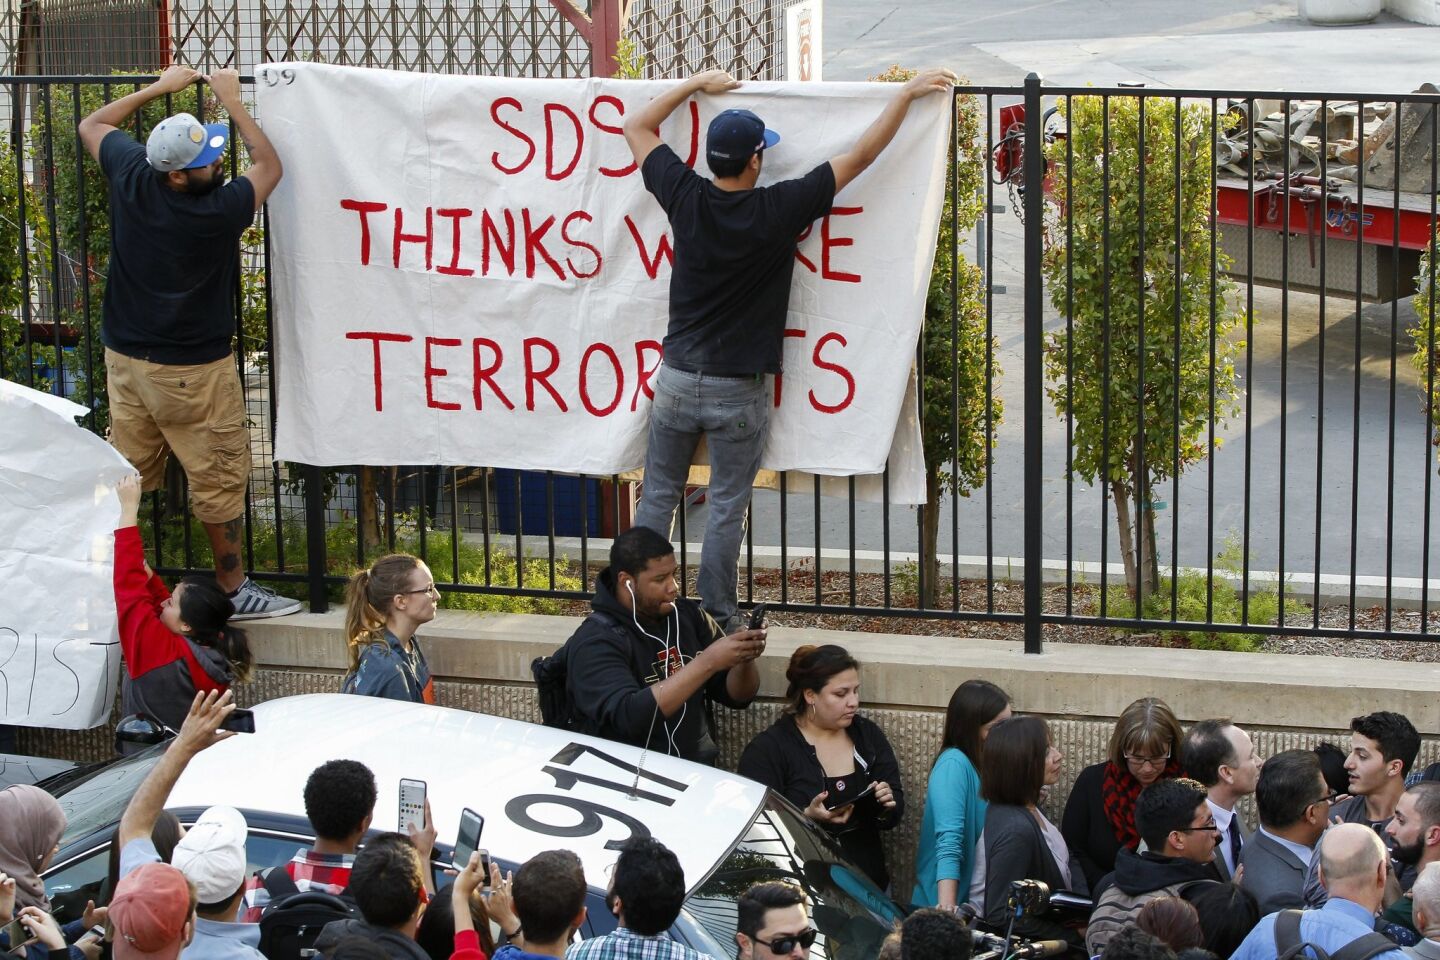 San Diego State students put up a sign as other students surround the SDSU president, lower right.